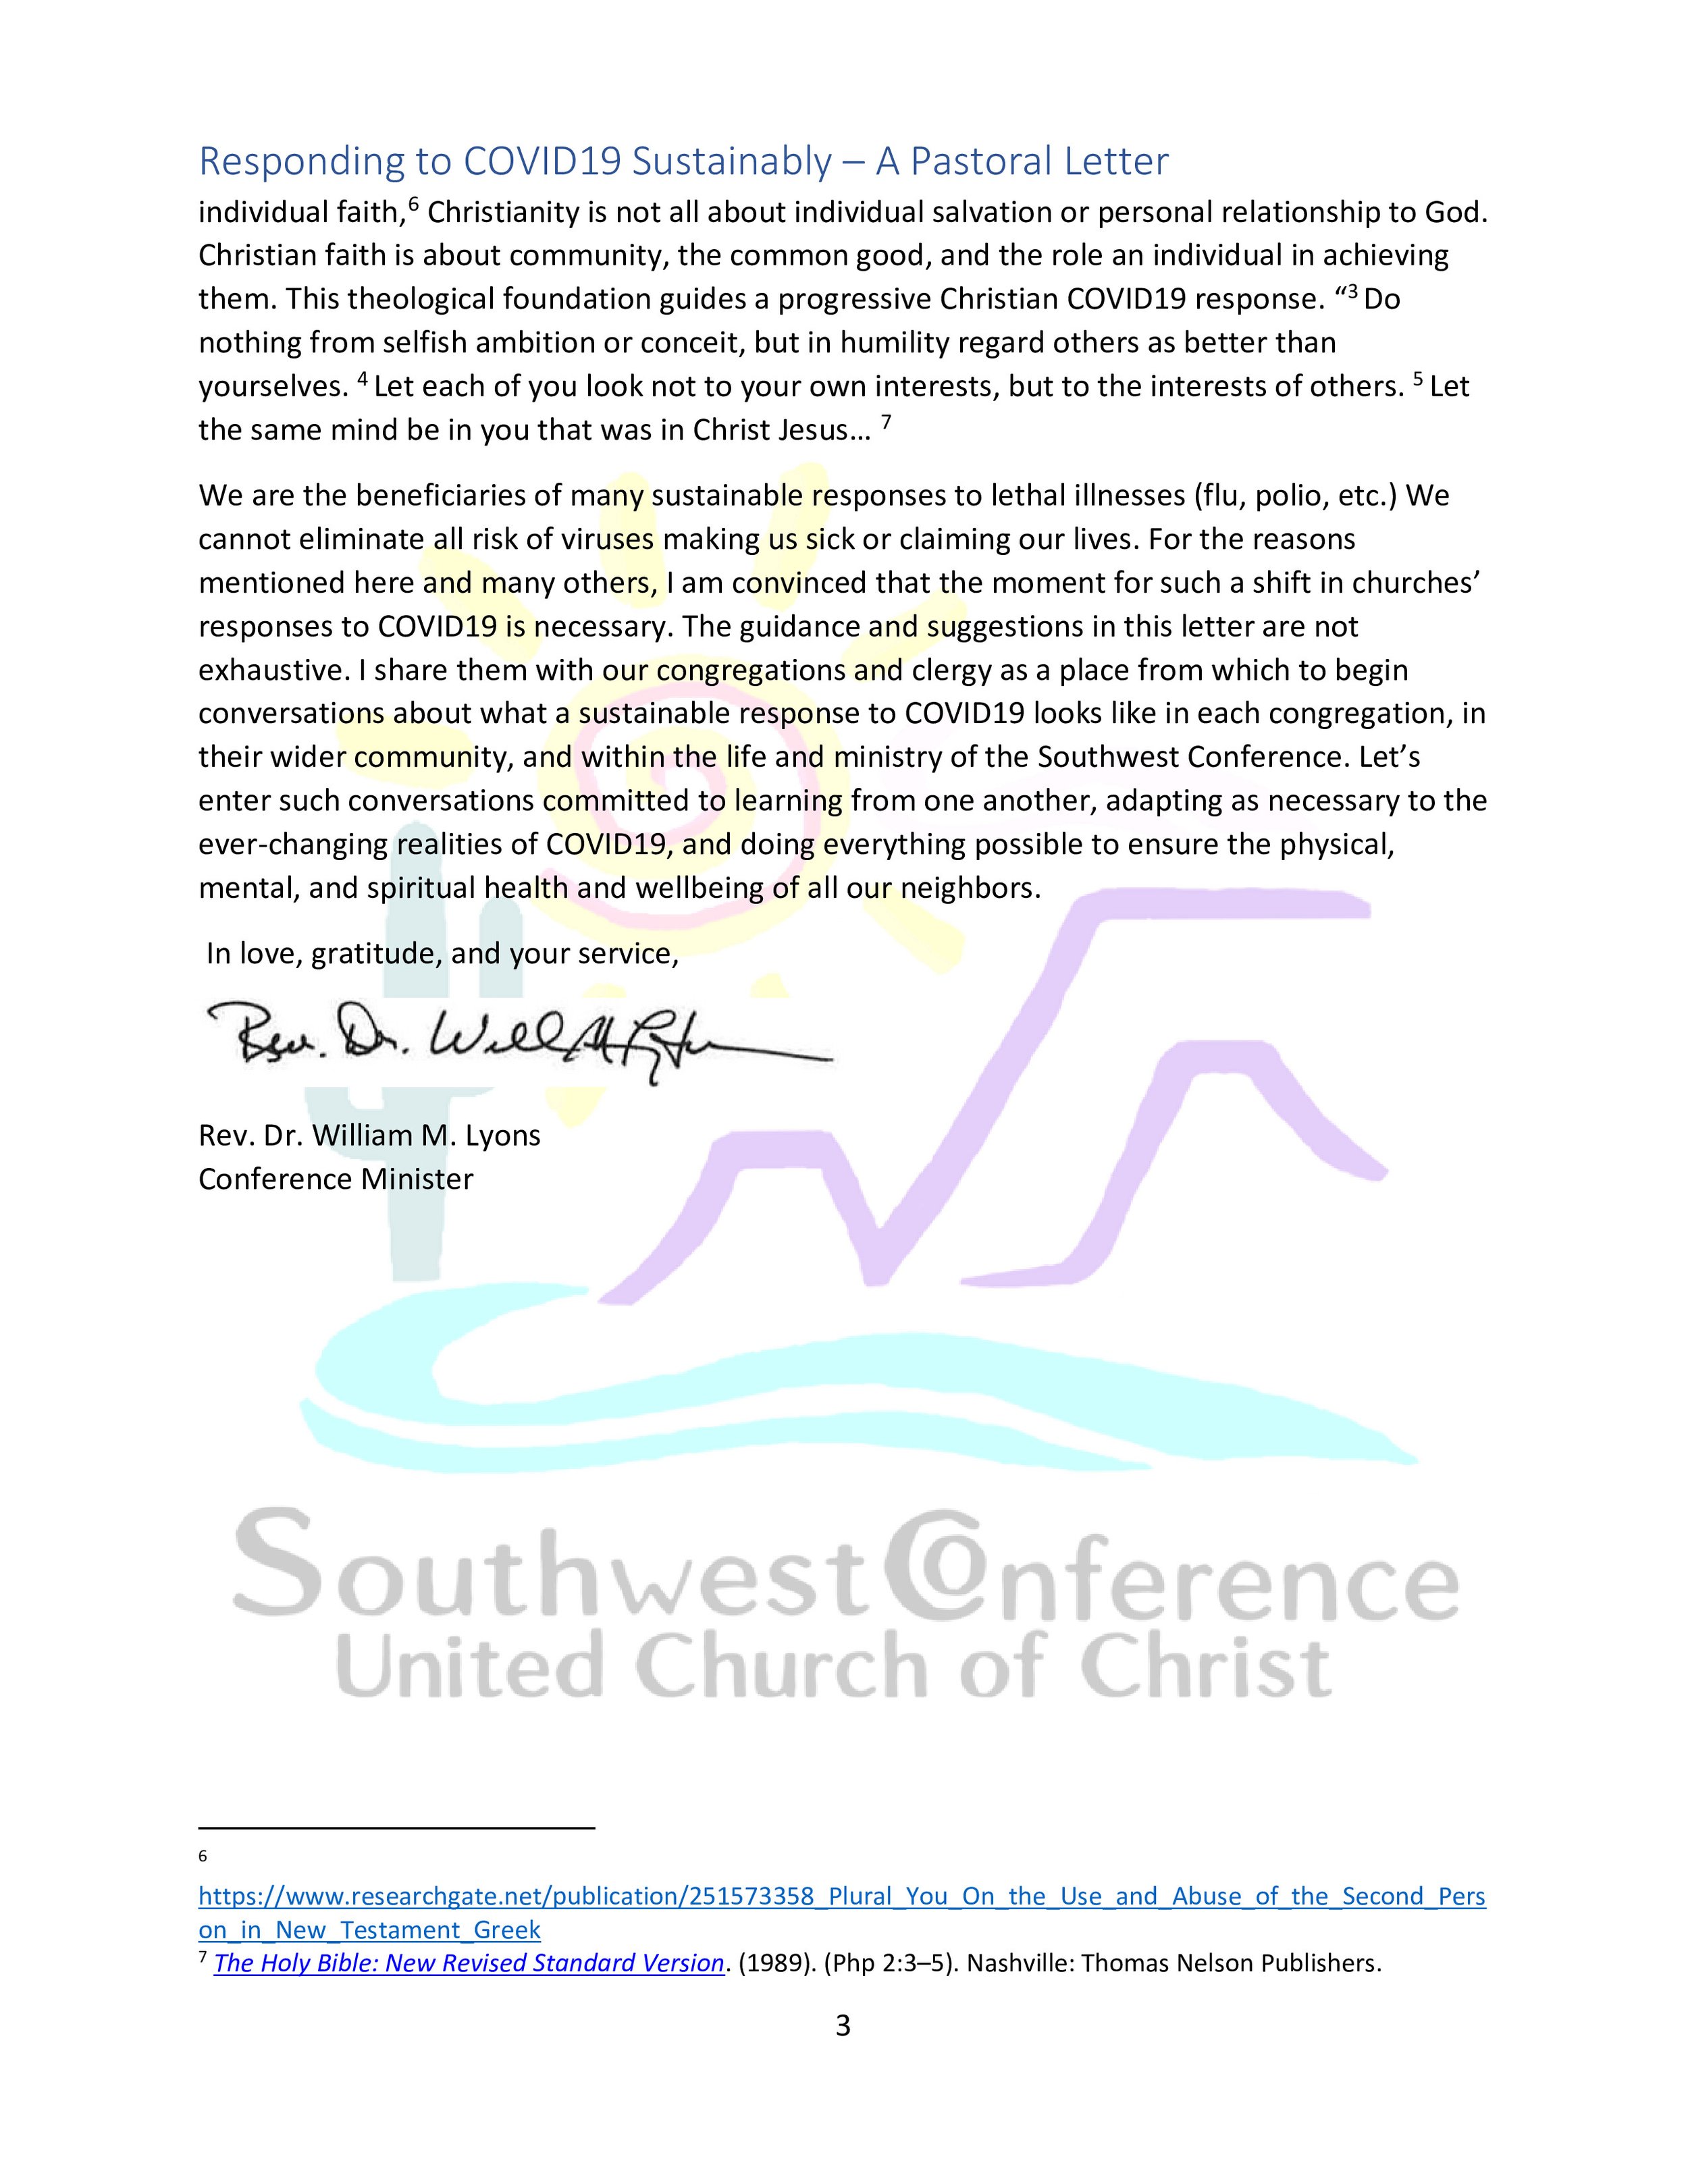 Sustainable Response to COVID19 - a pastoral letter page 3.jpg